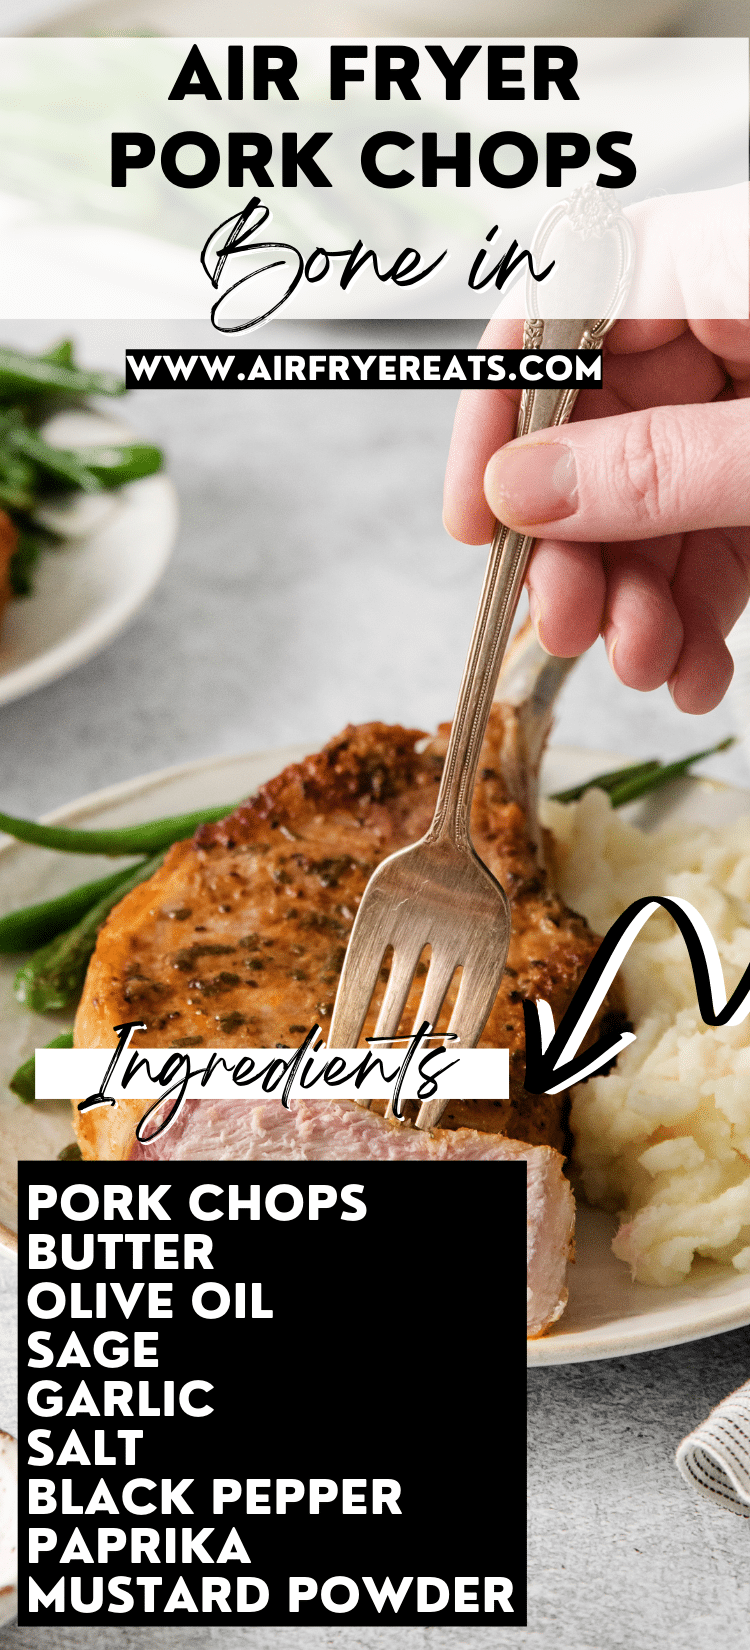 This recipe for Air Fryer Bone In Pork Chops is so simple, and will result in the tastiest pork chops ever! via @vegetarianmamma